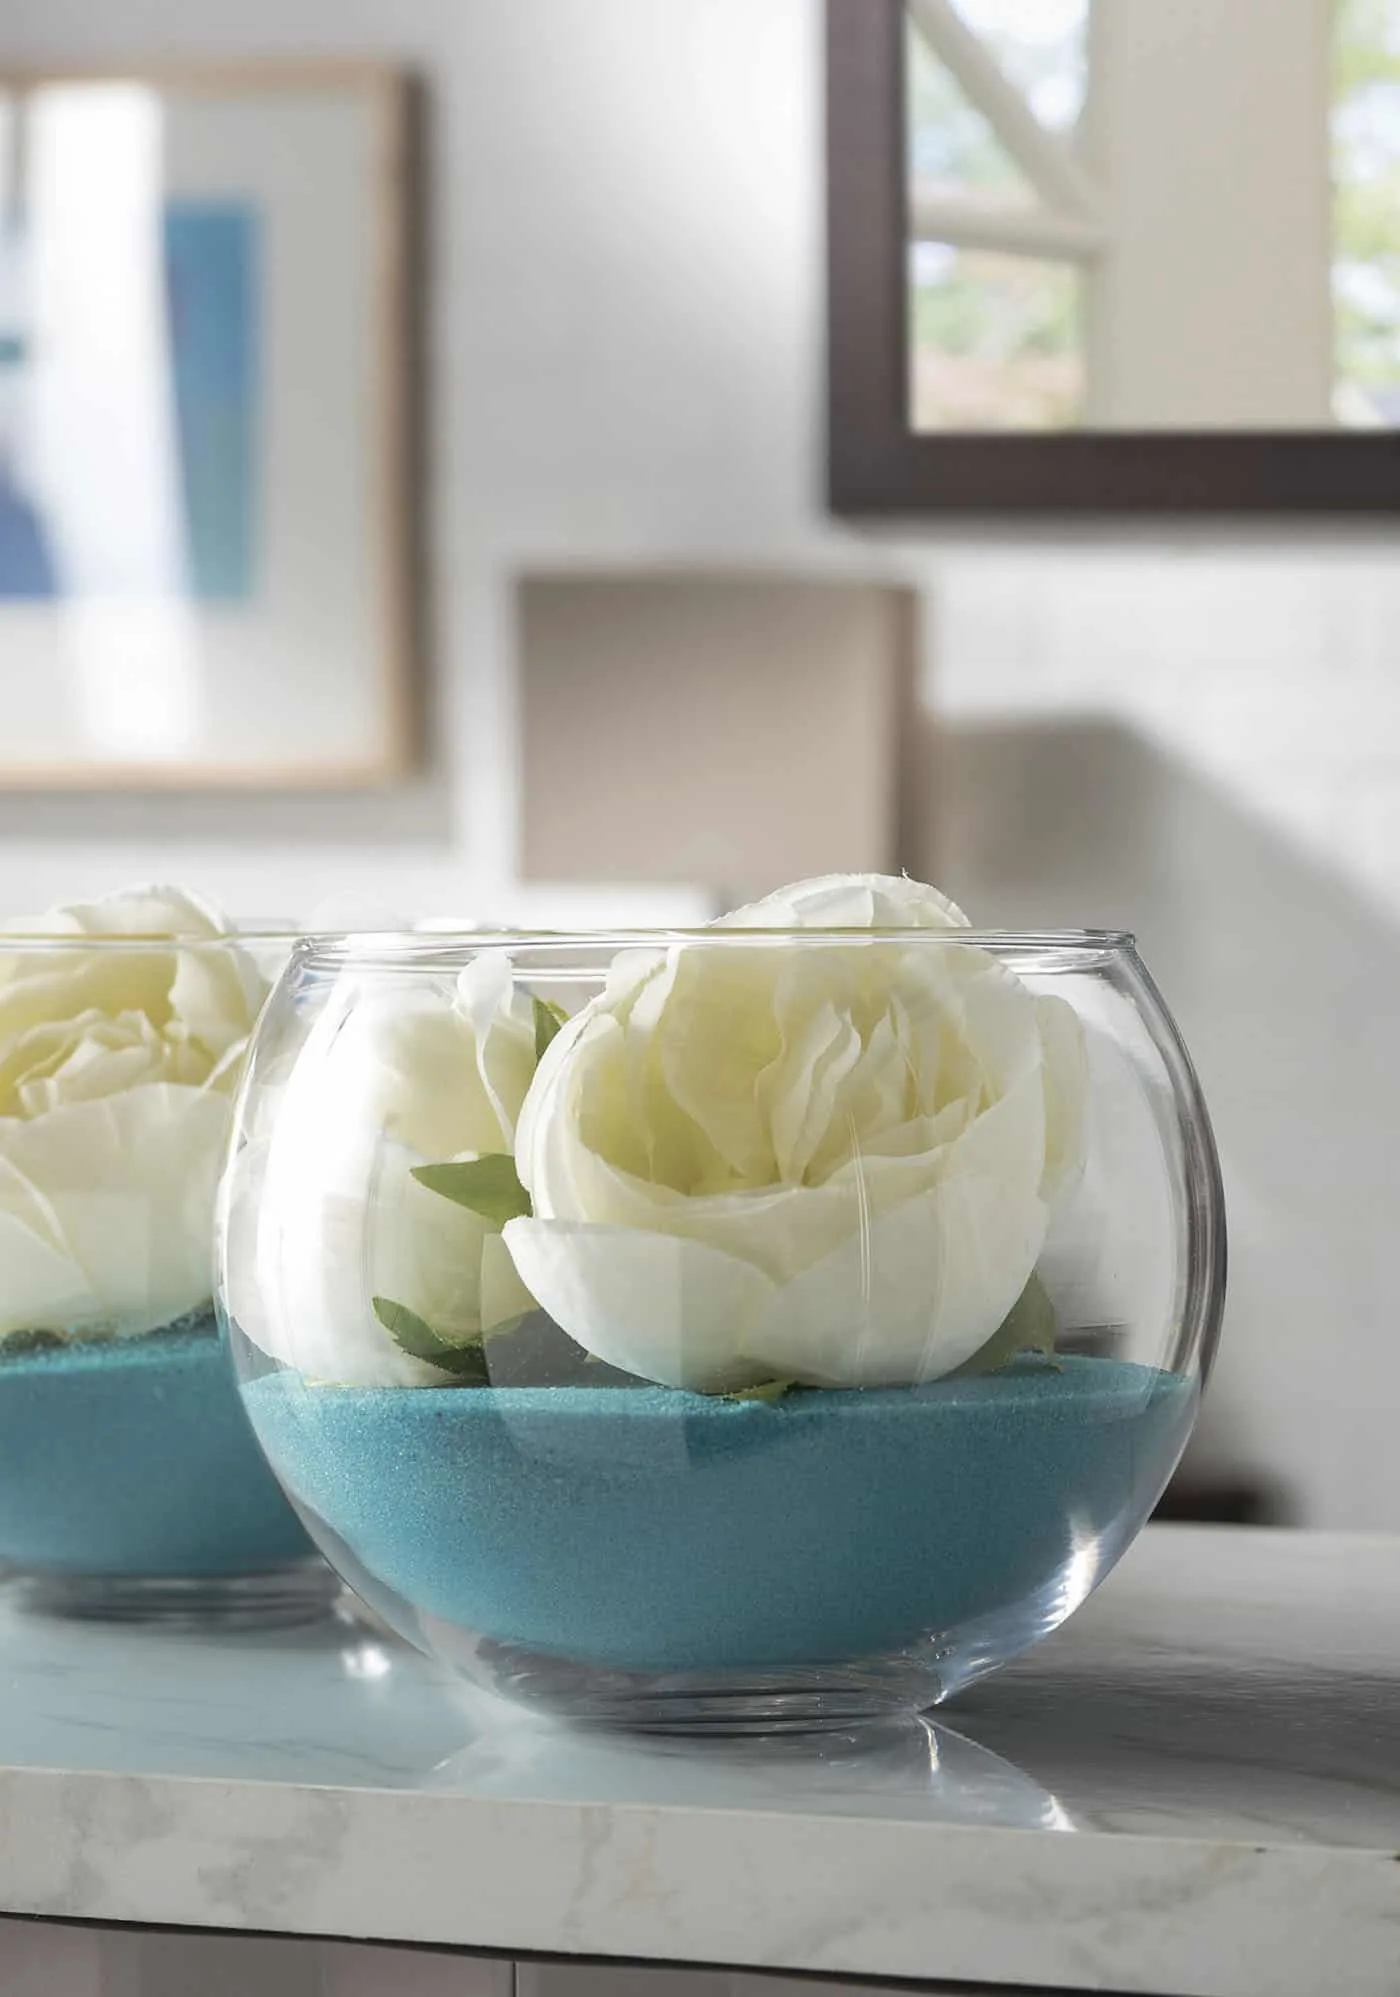 simple wedding centerpieces diy with glass bubble bowls